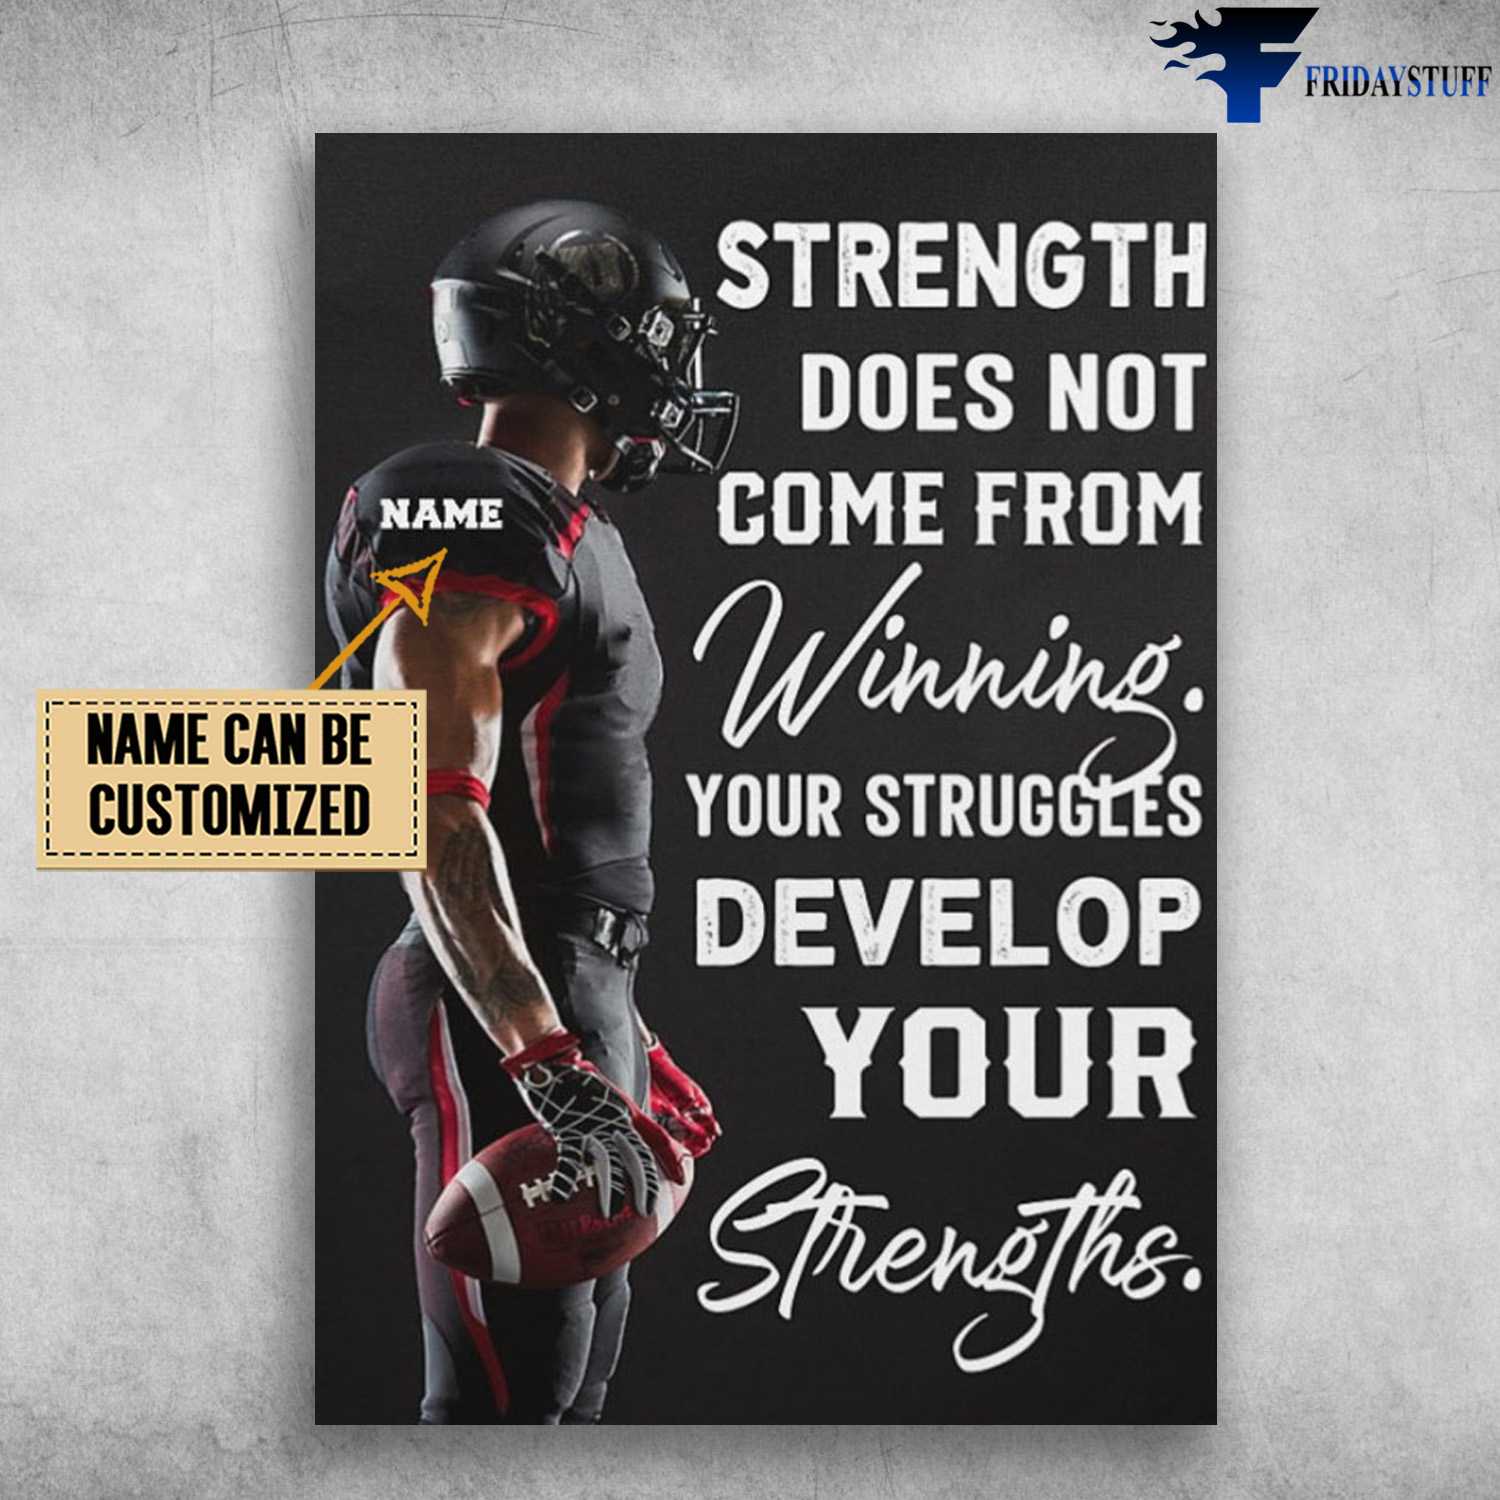 Football Player, Football Poster, Strength Does Not Come From Winning, Your Struggles Develop You Strengths